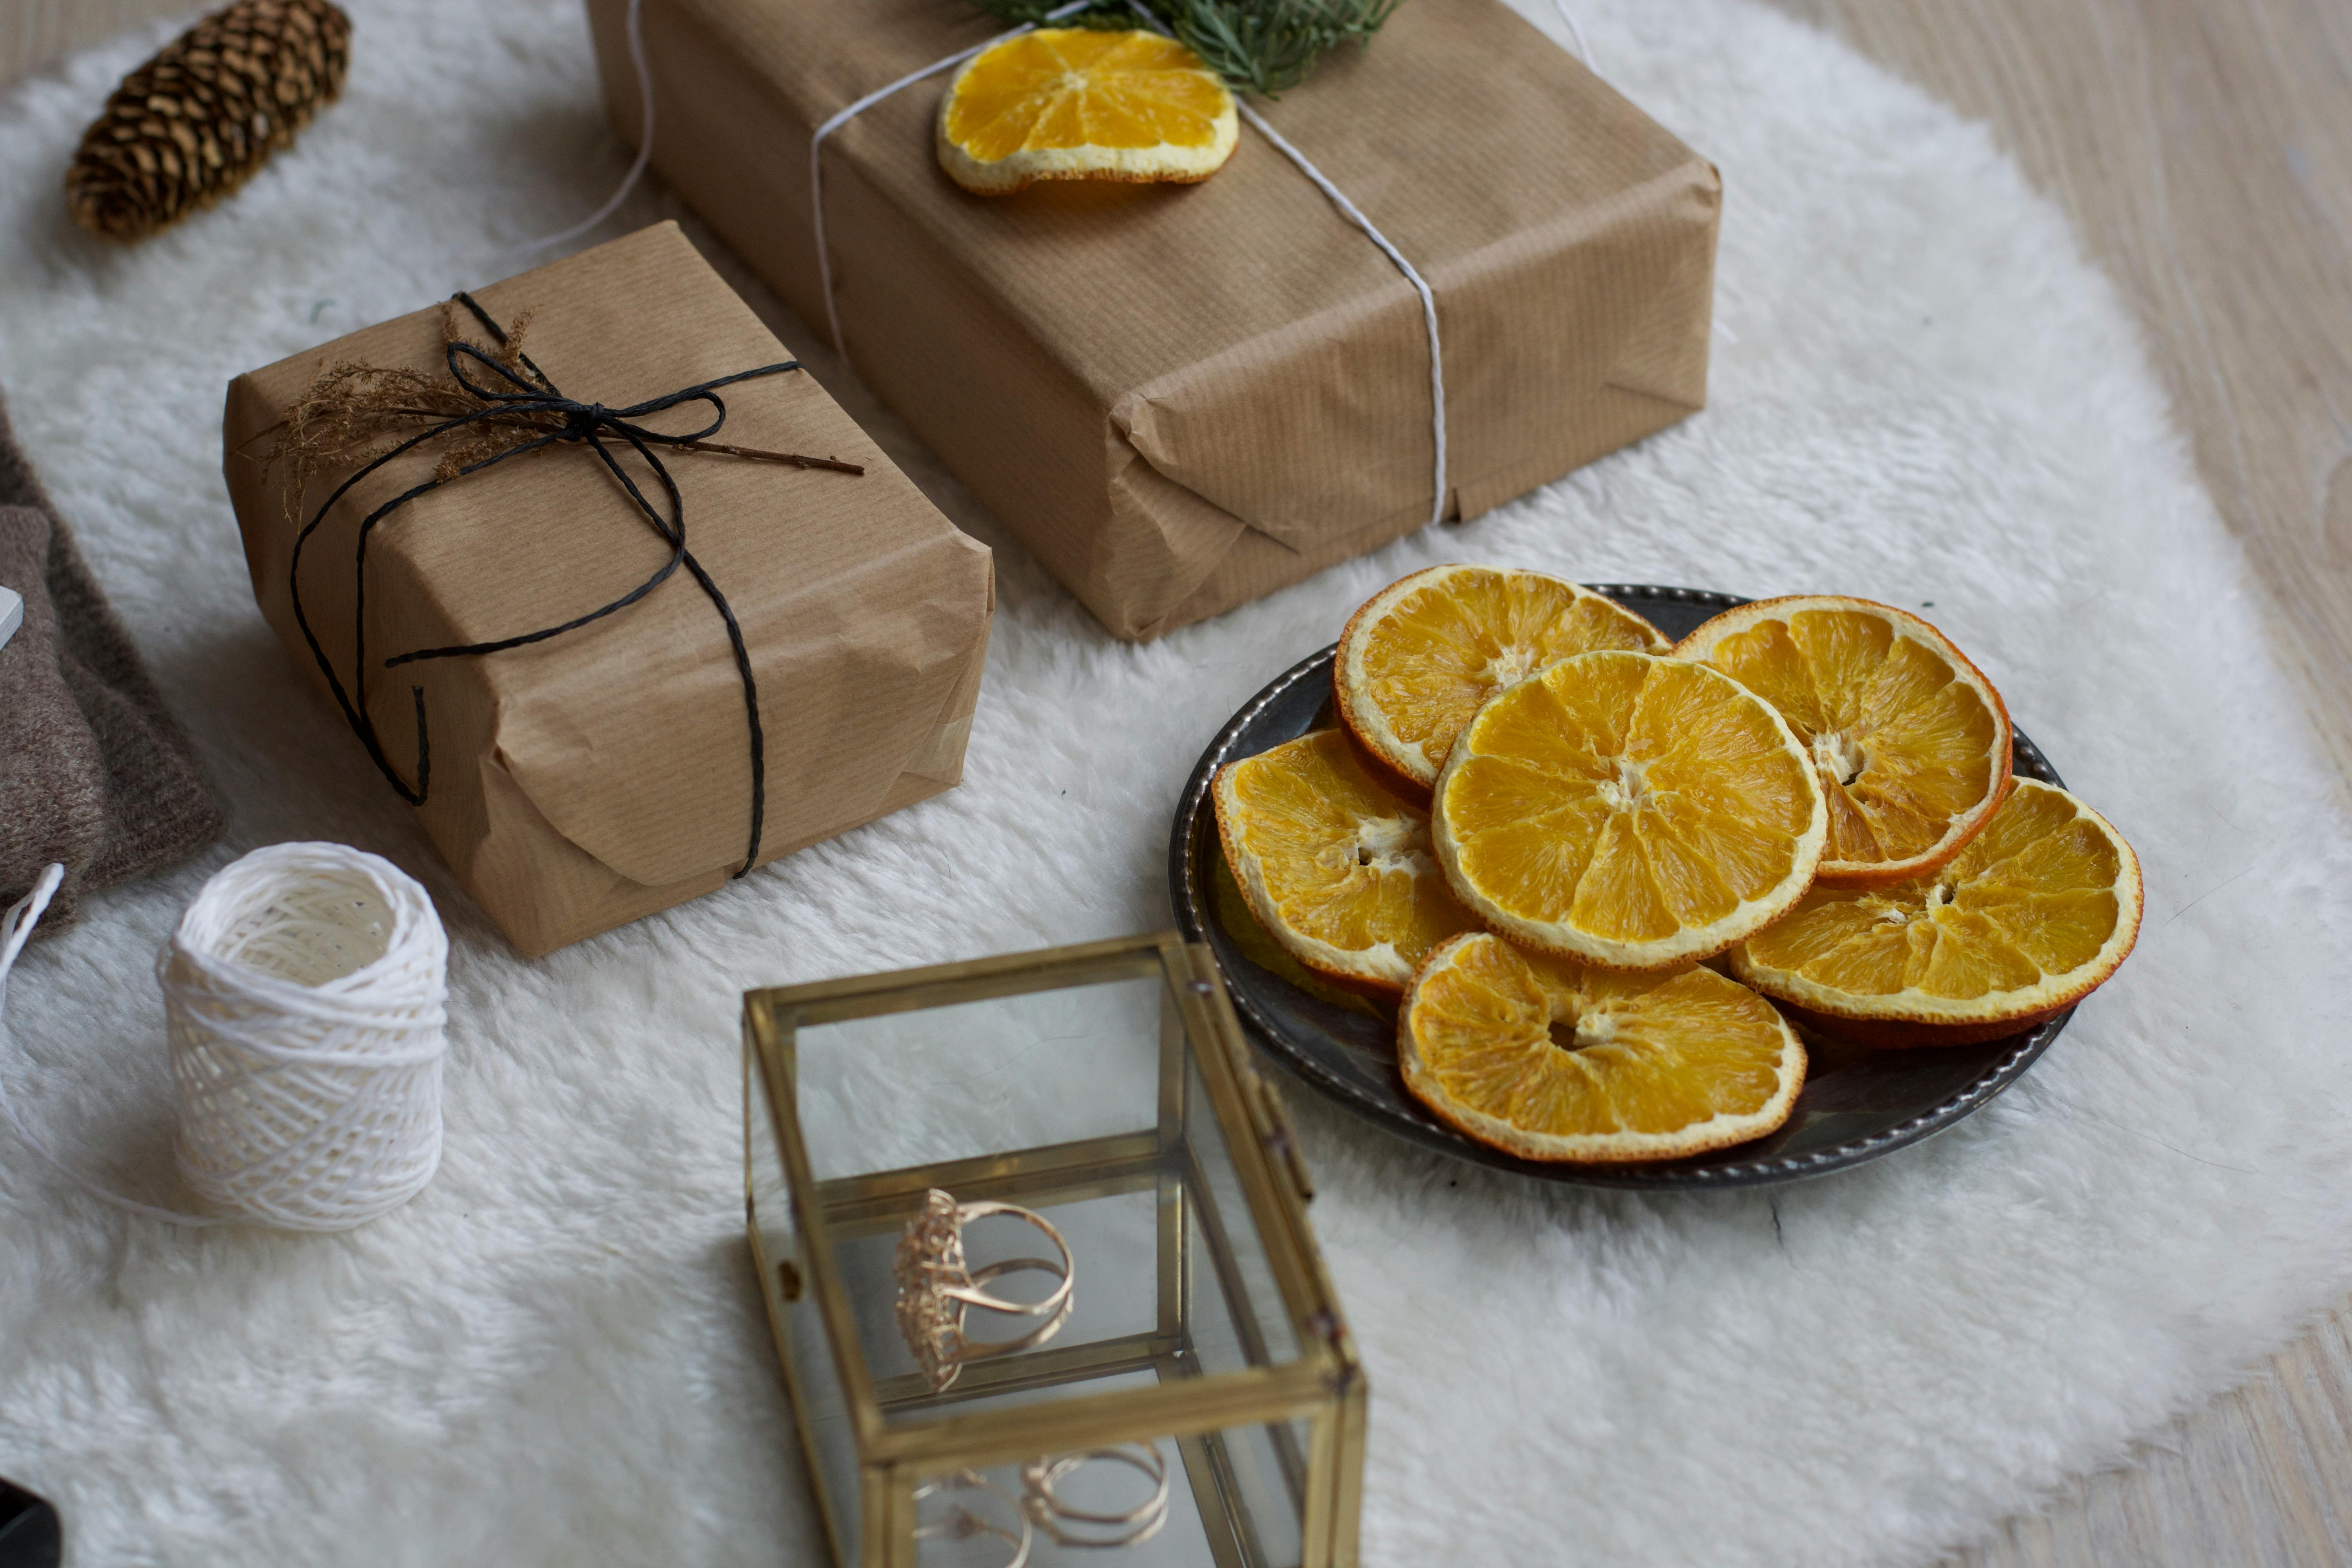 Gifts Boxes and Orange Slices · Free Stock Photo